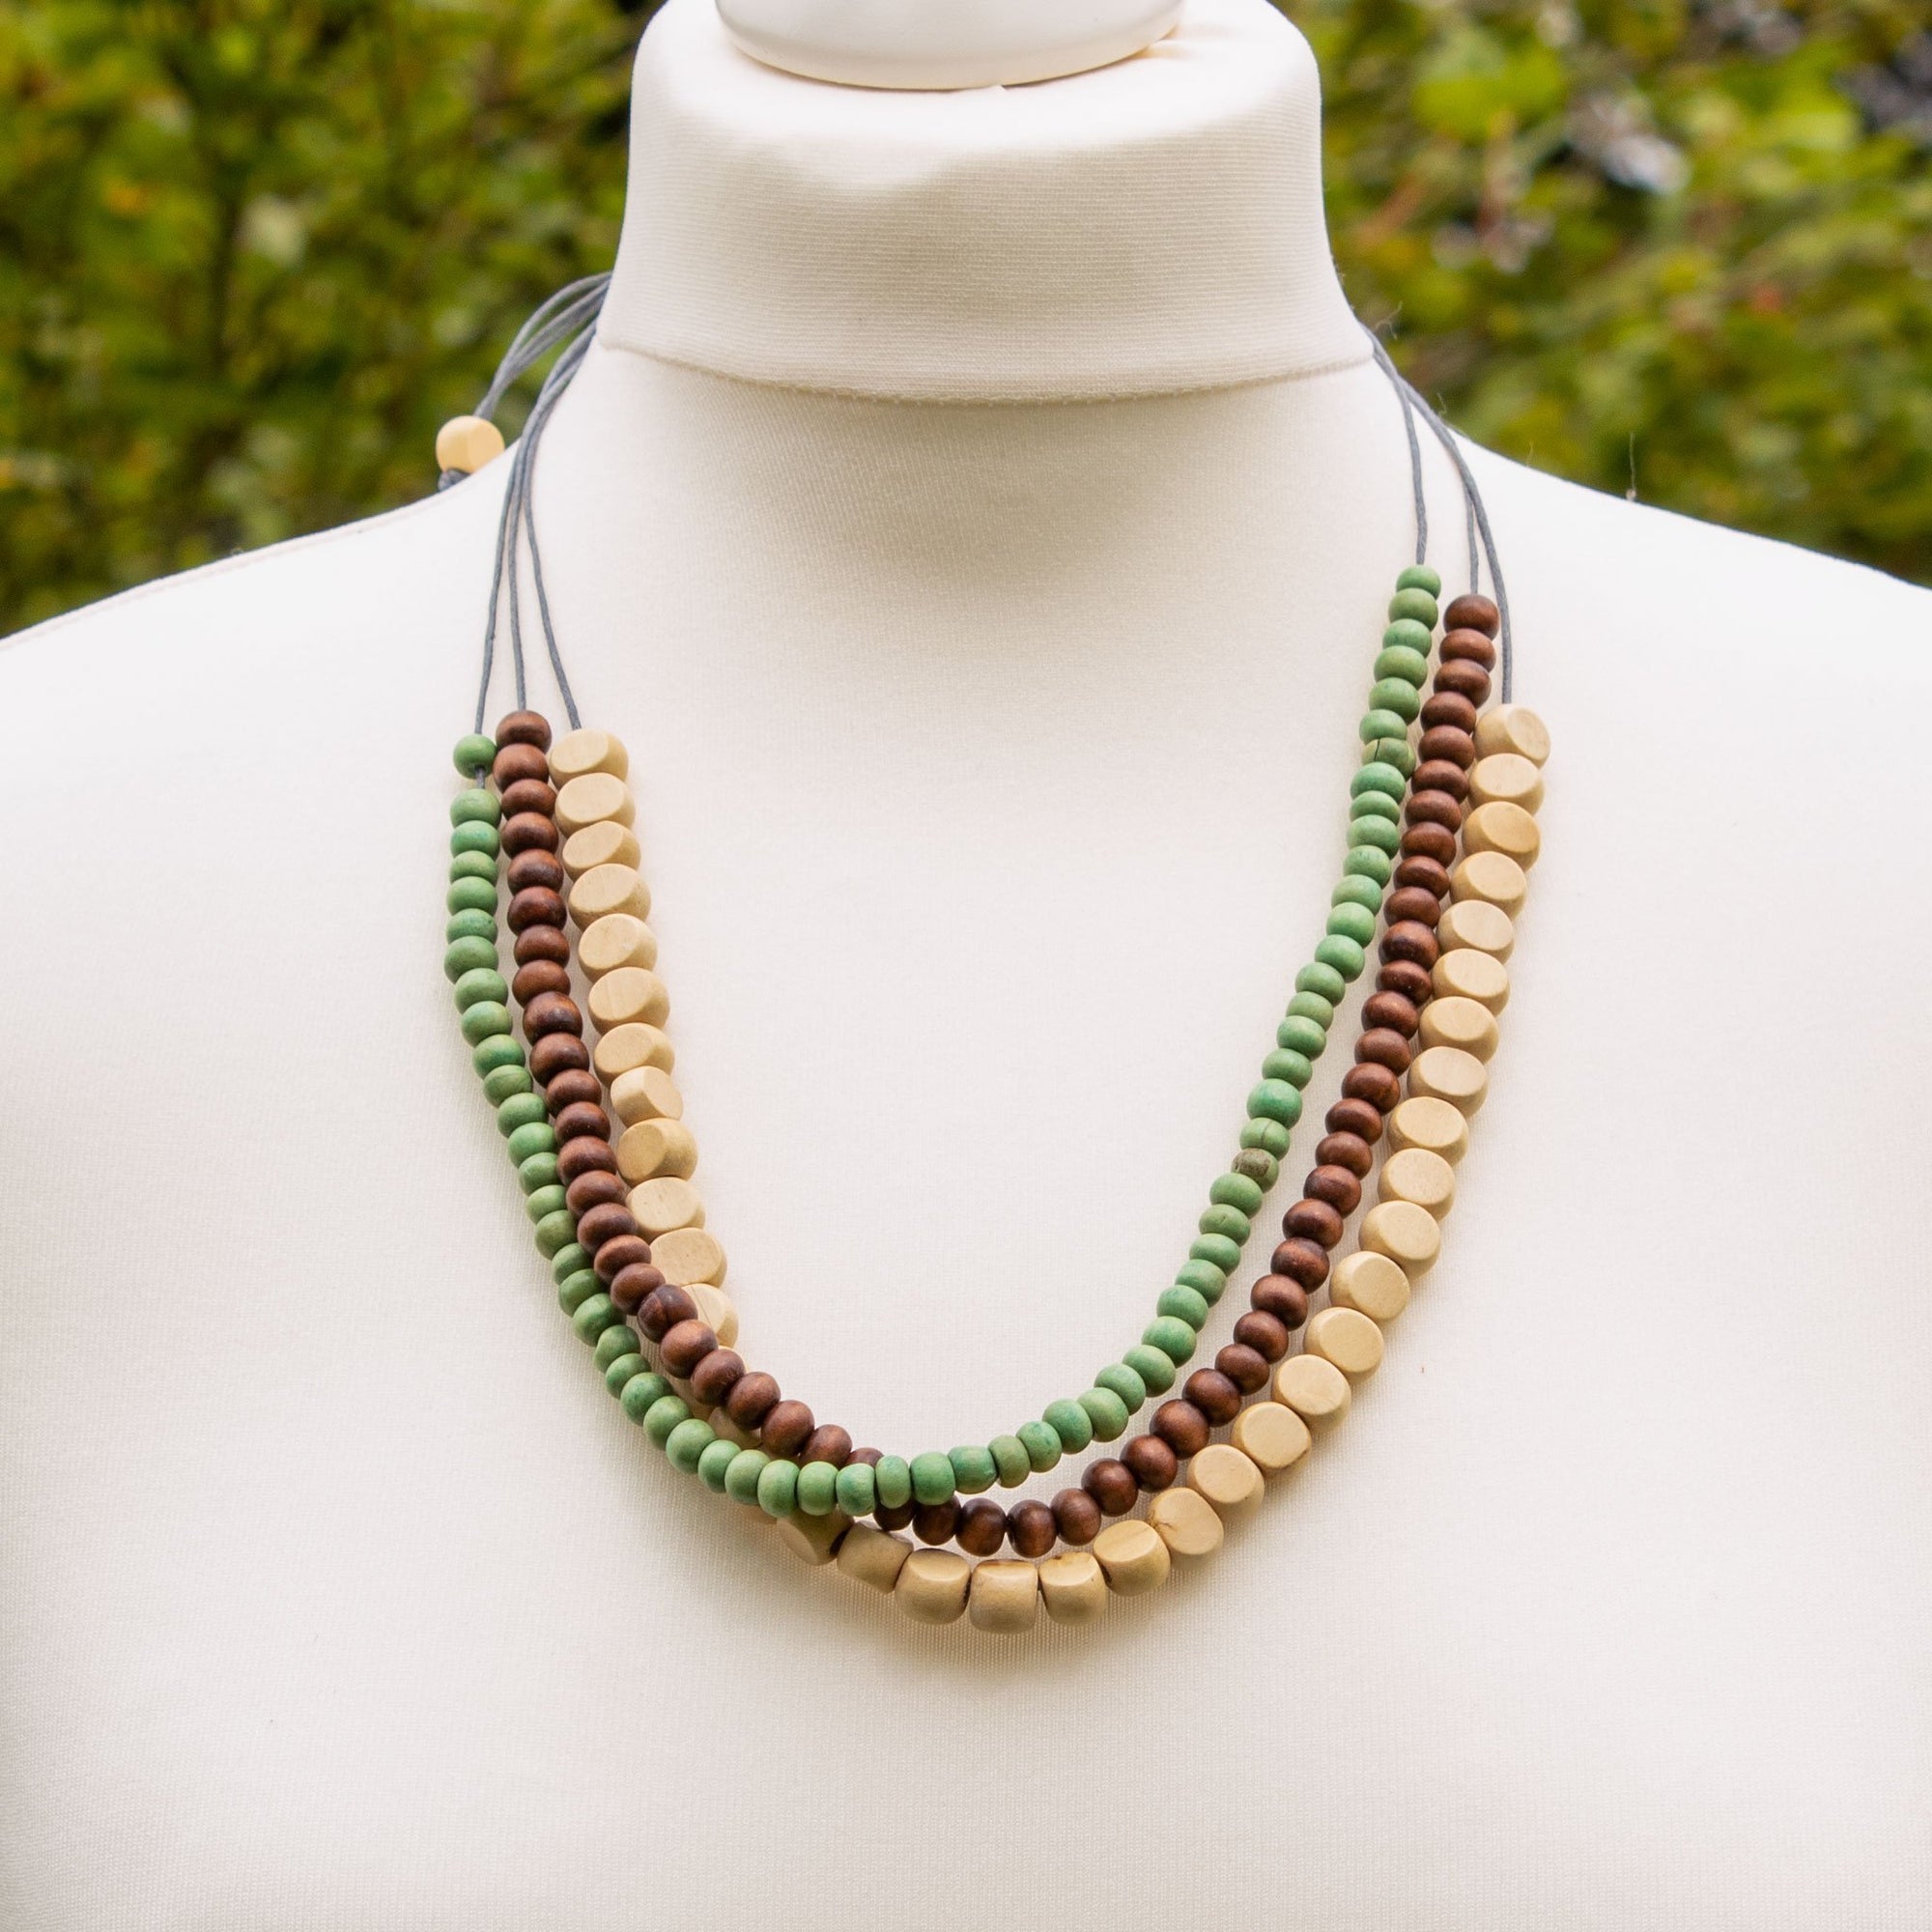 Green, Cream & Brown Wooden Necklace | Necklace - The Naughty Shrew